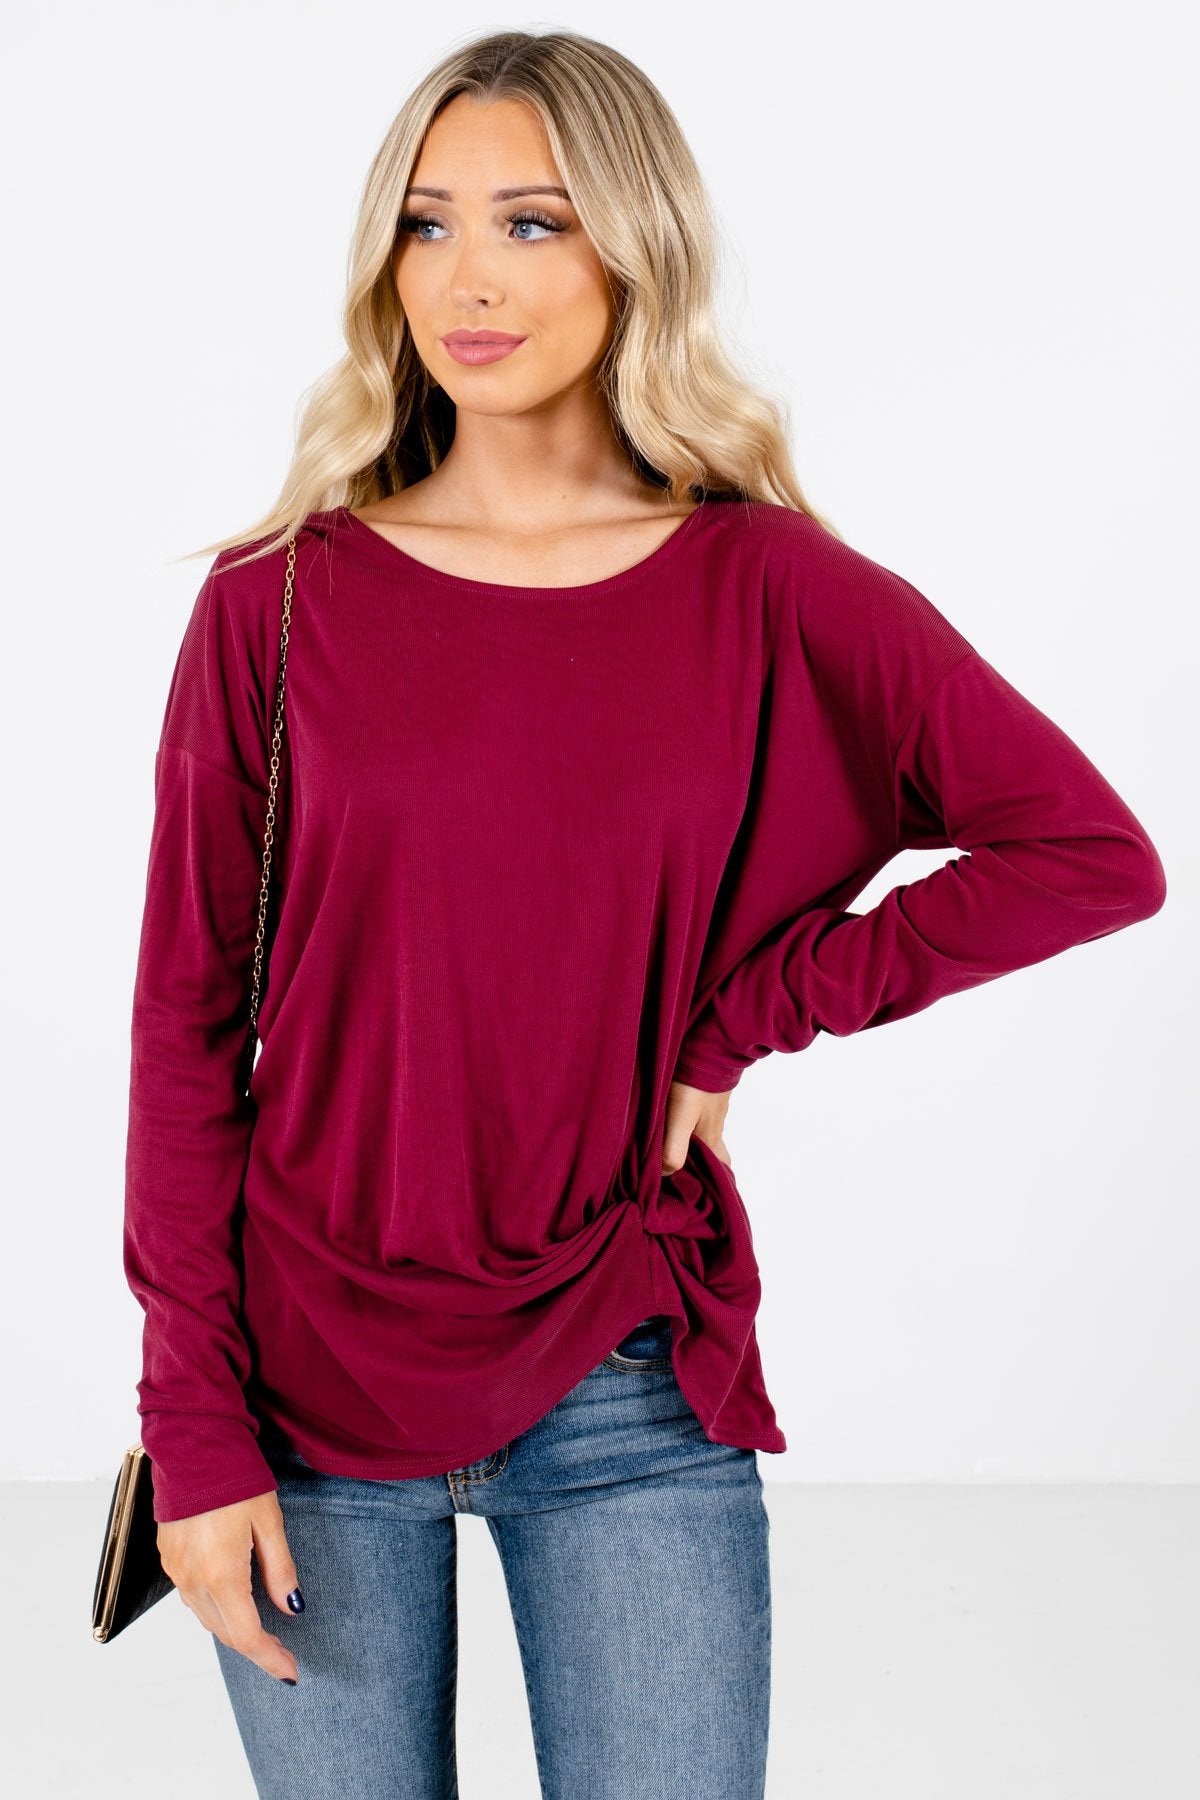 Red Infinity Knot Detail Boutique Tops for Women